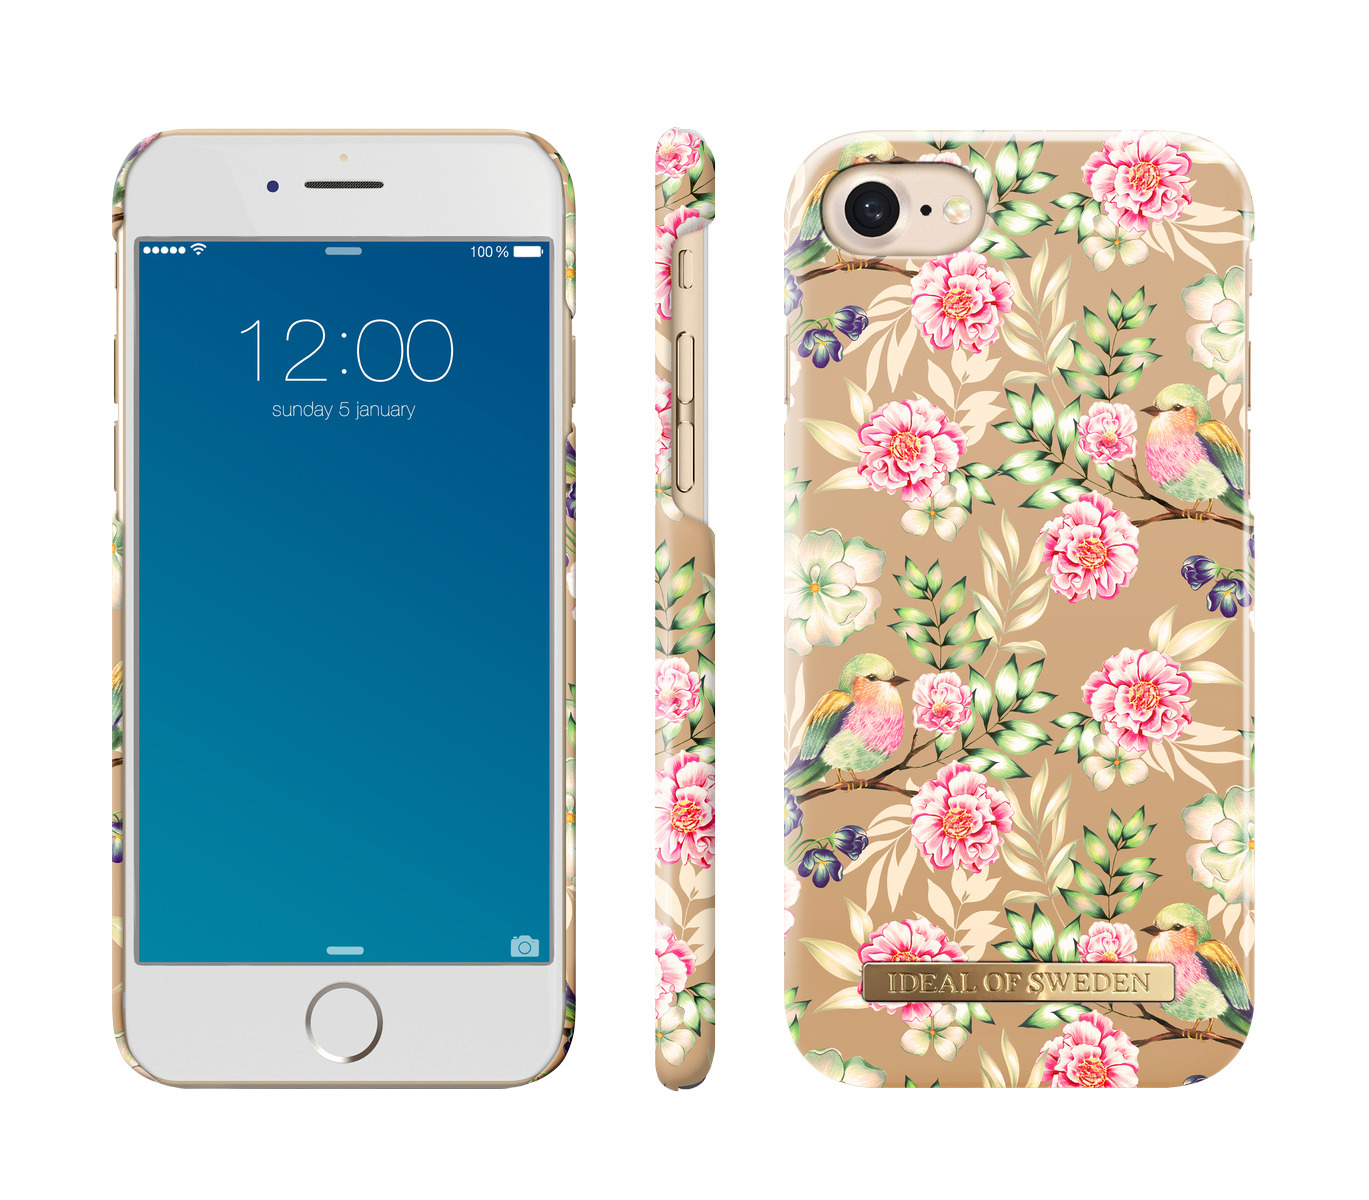 7, iPhone Fashion, 8, IDEAL Backcover, Birds iPhone 6, Apple, Champagne iPhone SWEDEN OF